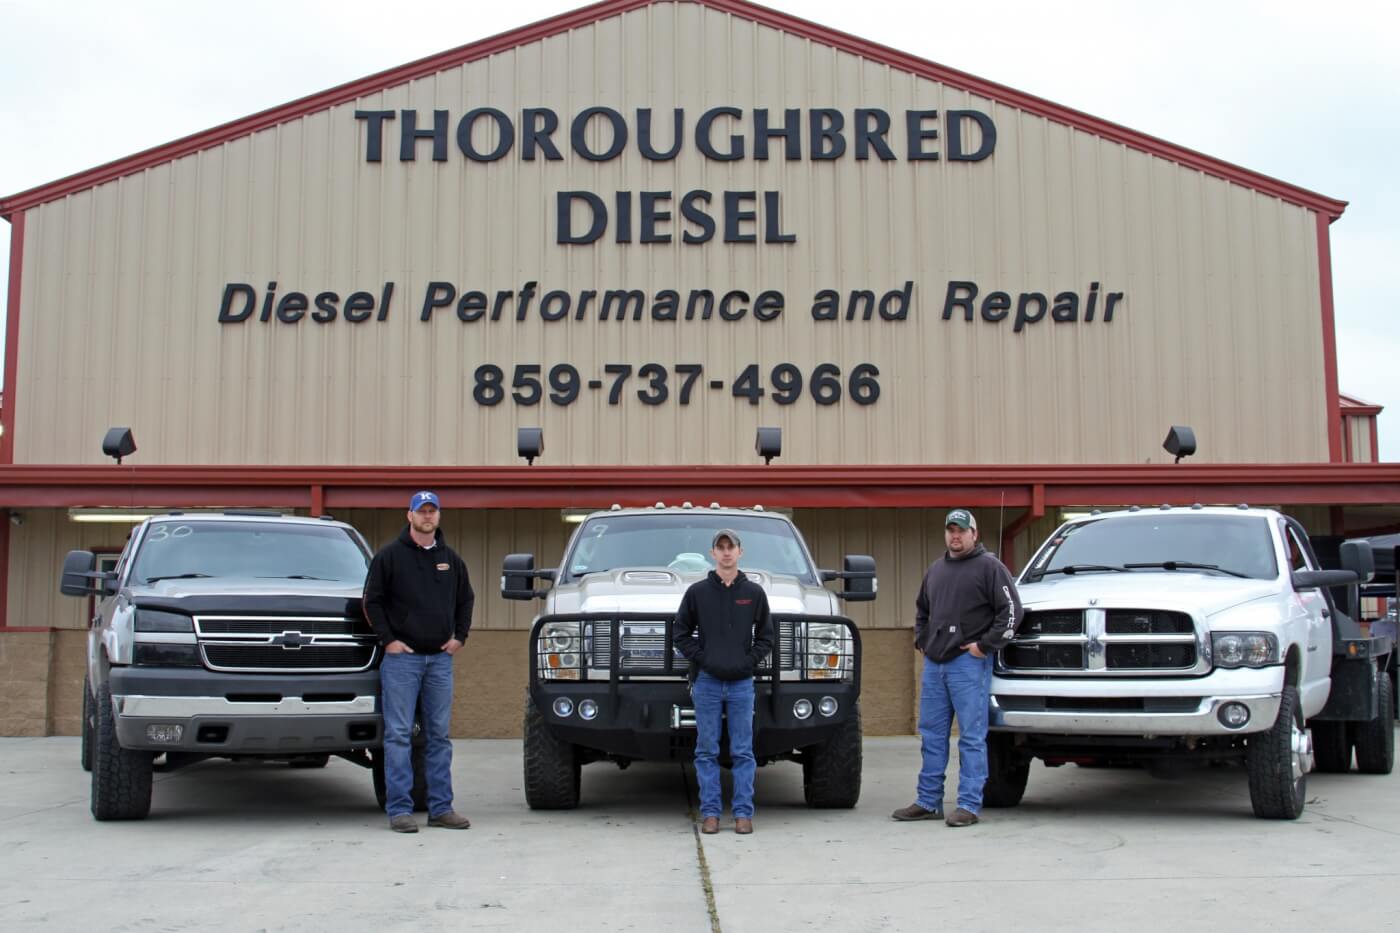 The Stock class winners included second place Larry Bailey, winner Jonathan Rhoades and third place Jarrod Cox (from left to right), shown here posing with their trucks.